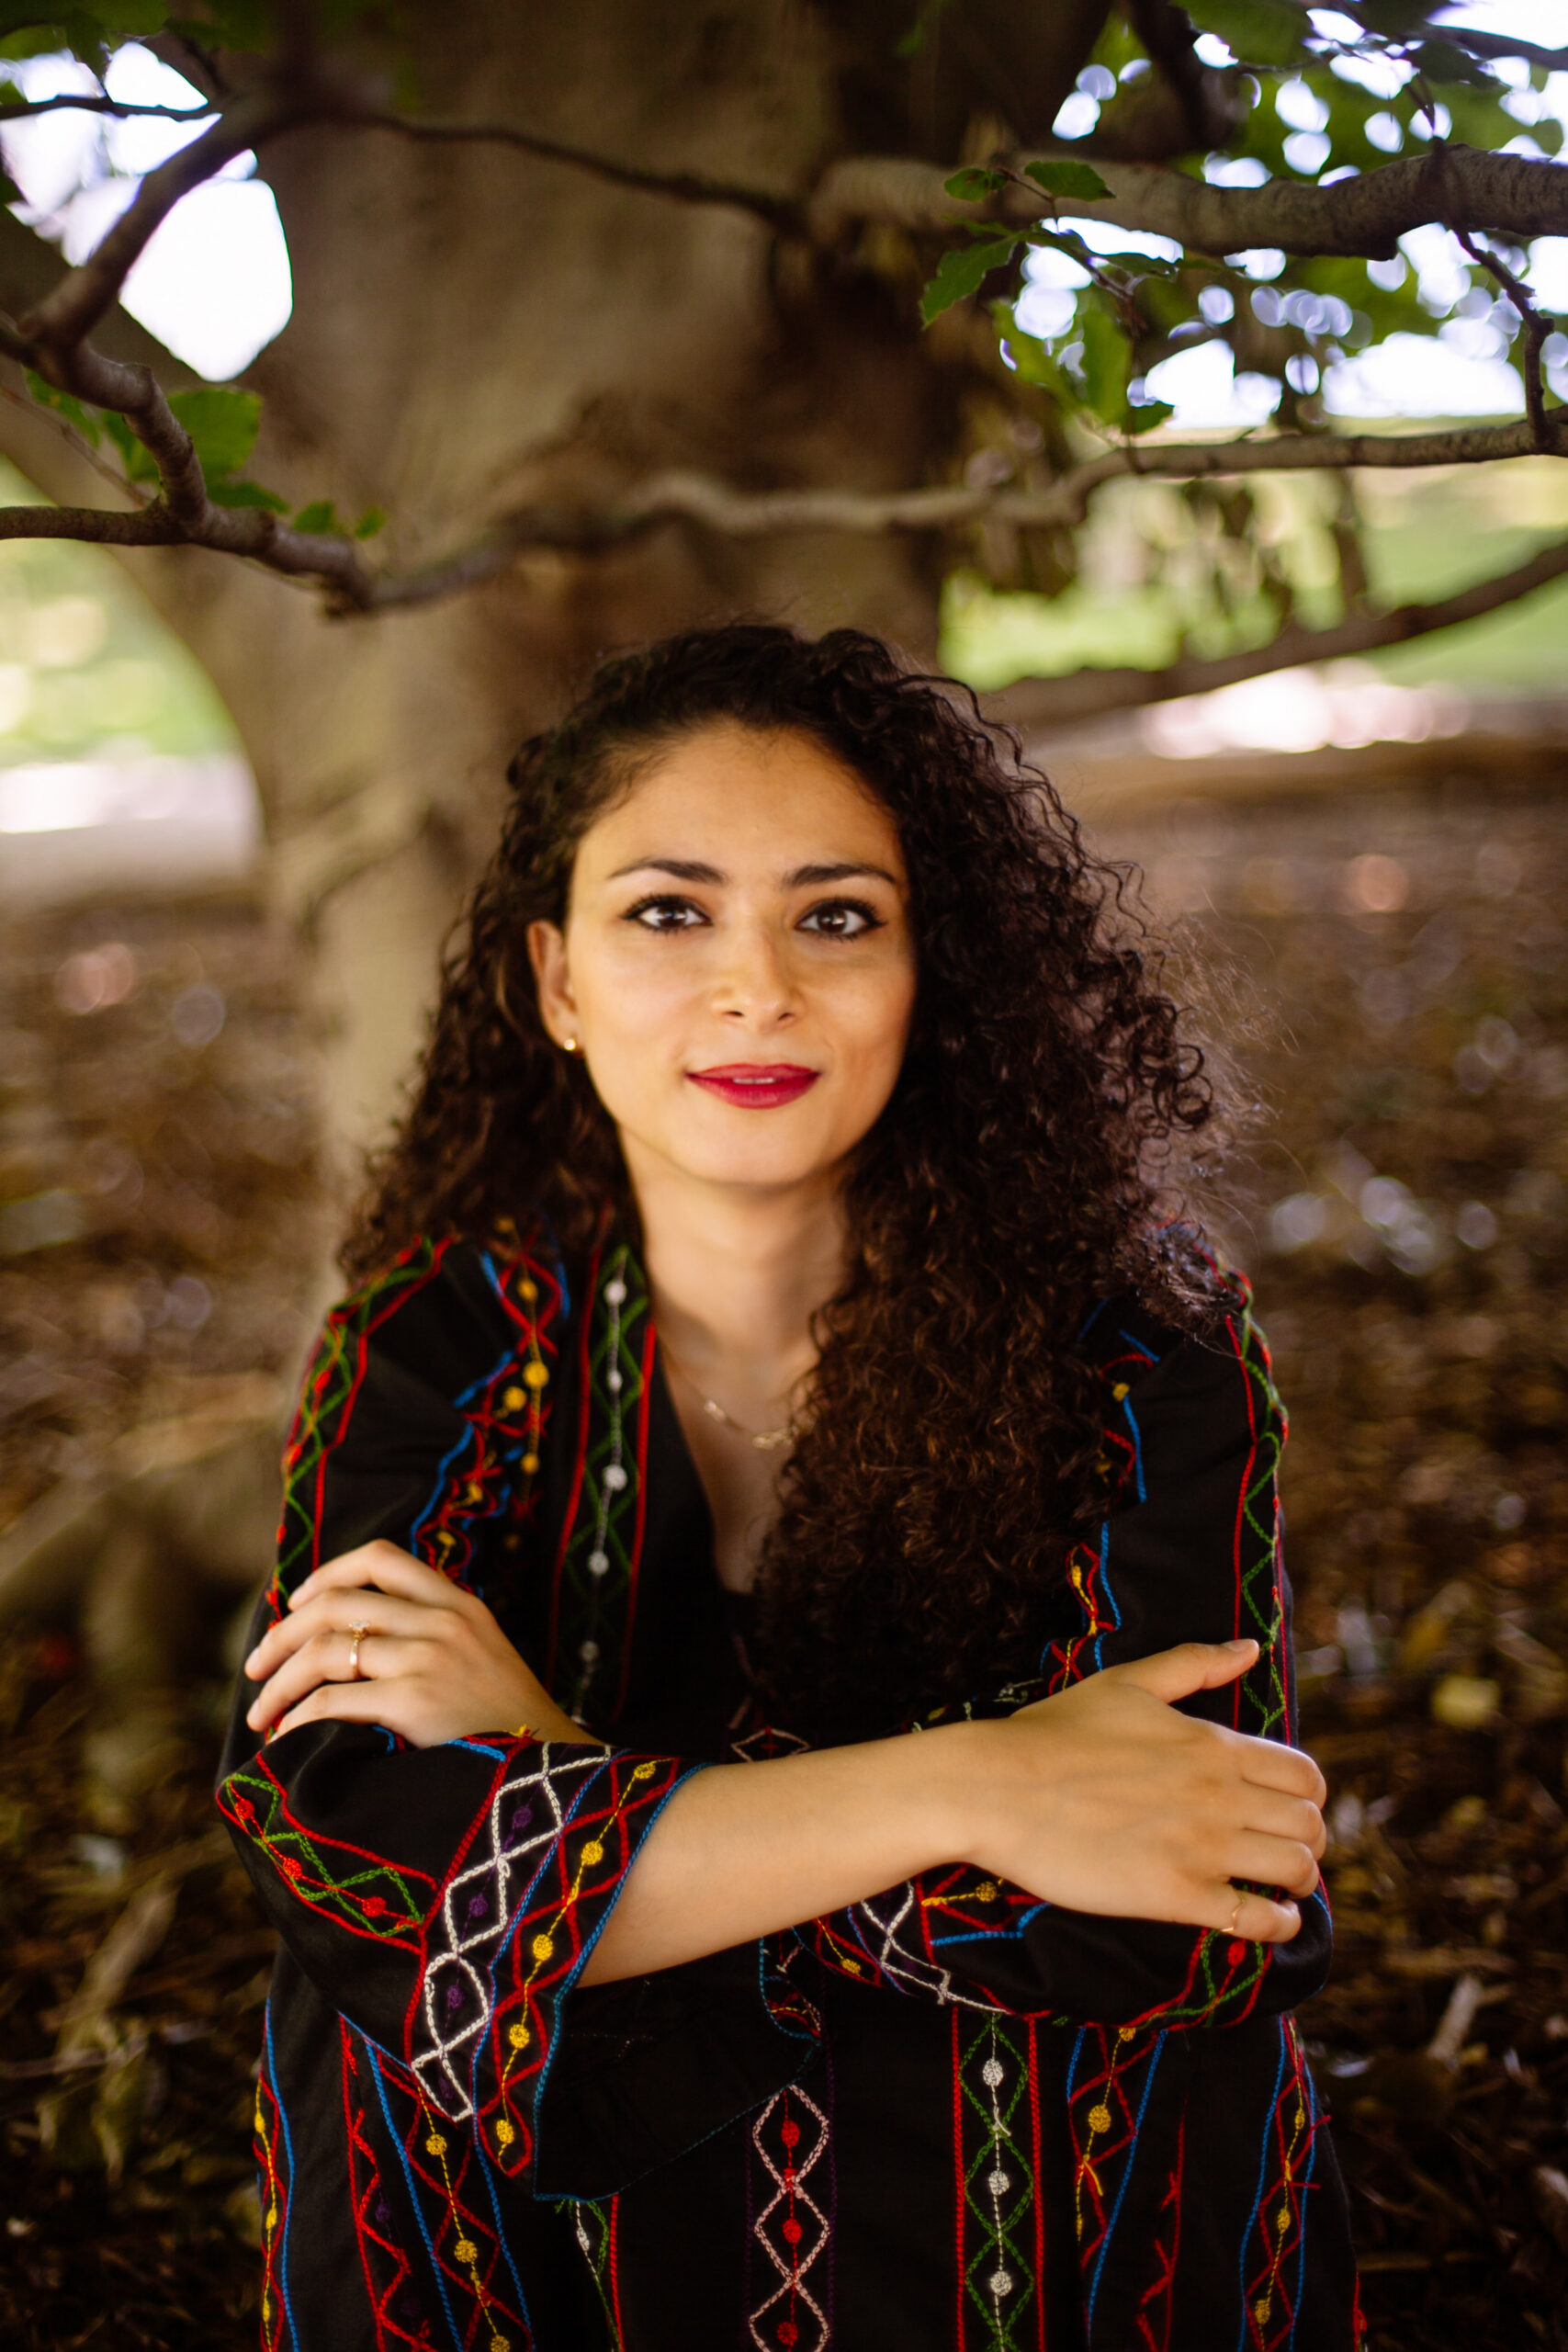 Alexandra is looking at the camera, smiling. Her arms are crossed and she is wearing a black jacket with a colourful pattern. There is a tree behind her.